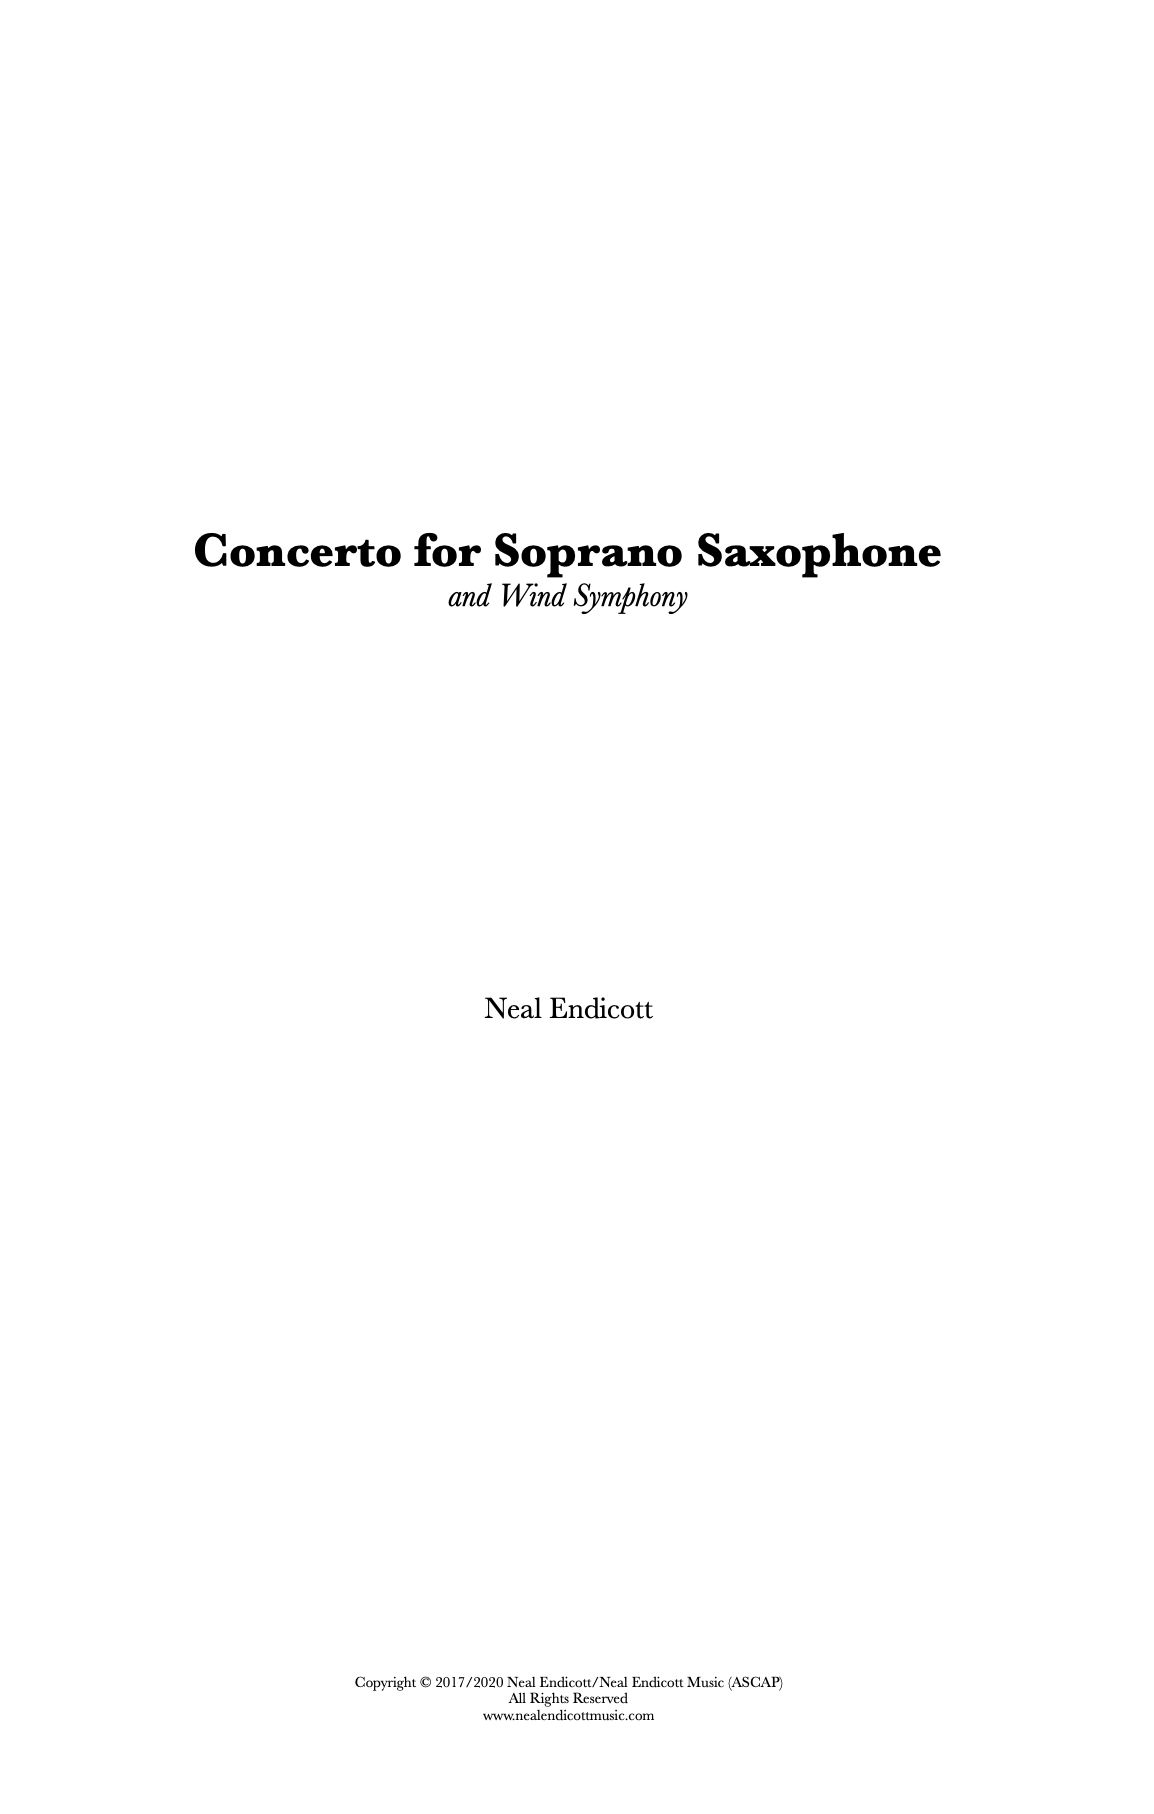 Concerto For Soprano Saxophone And Wind Symphony by Neal Endicott